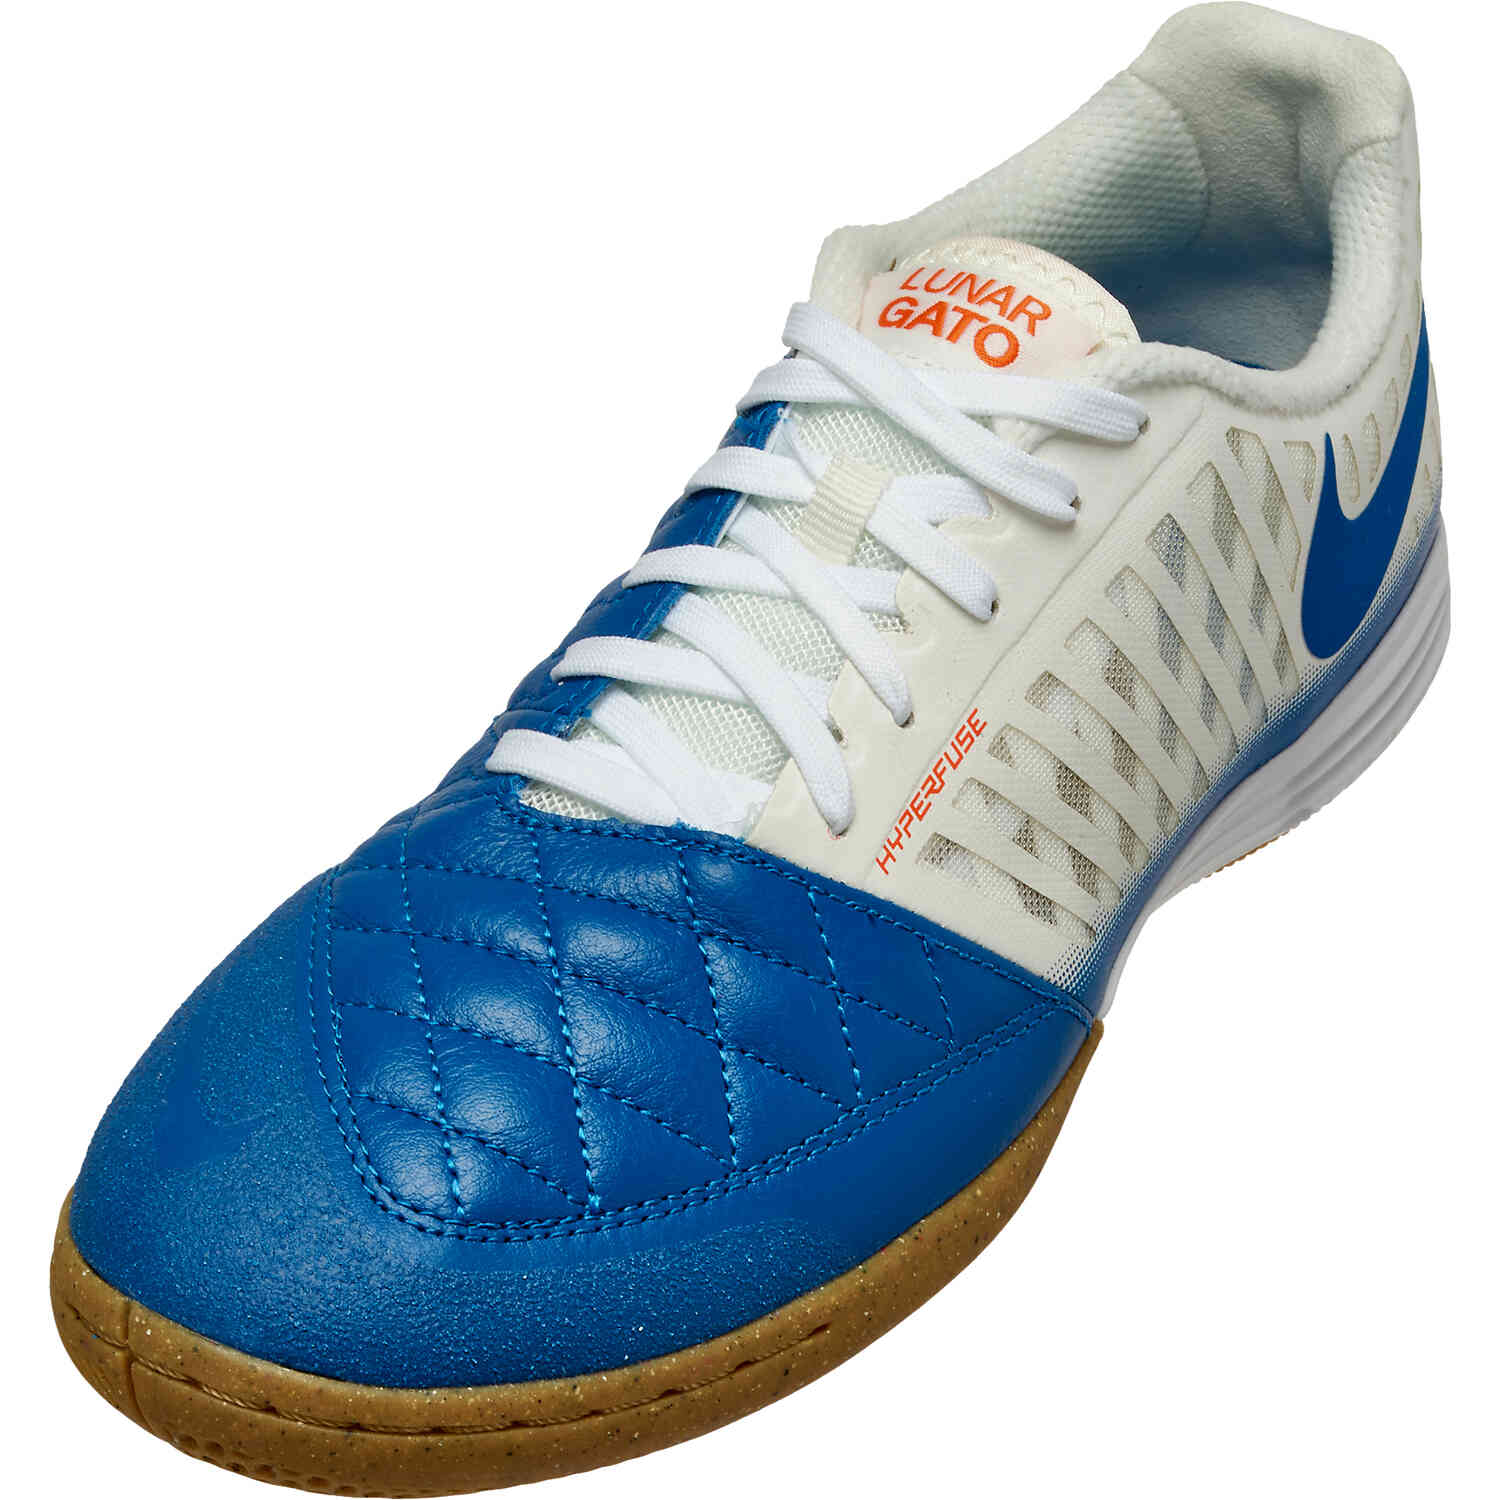 Nike Lunar Gato II IC Indoor Soccer Shoes - Sail, Blue Jay White - Soccer